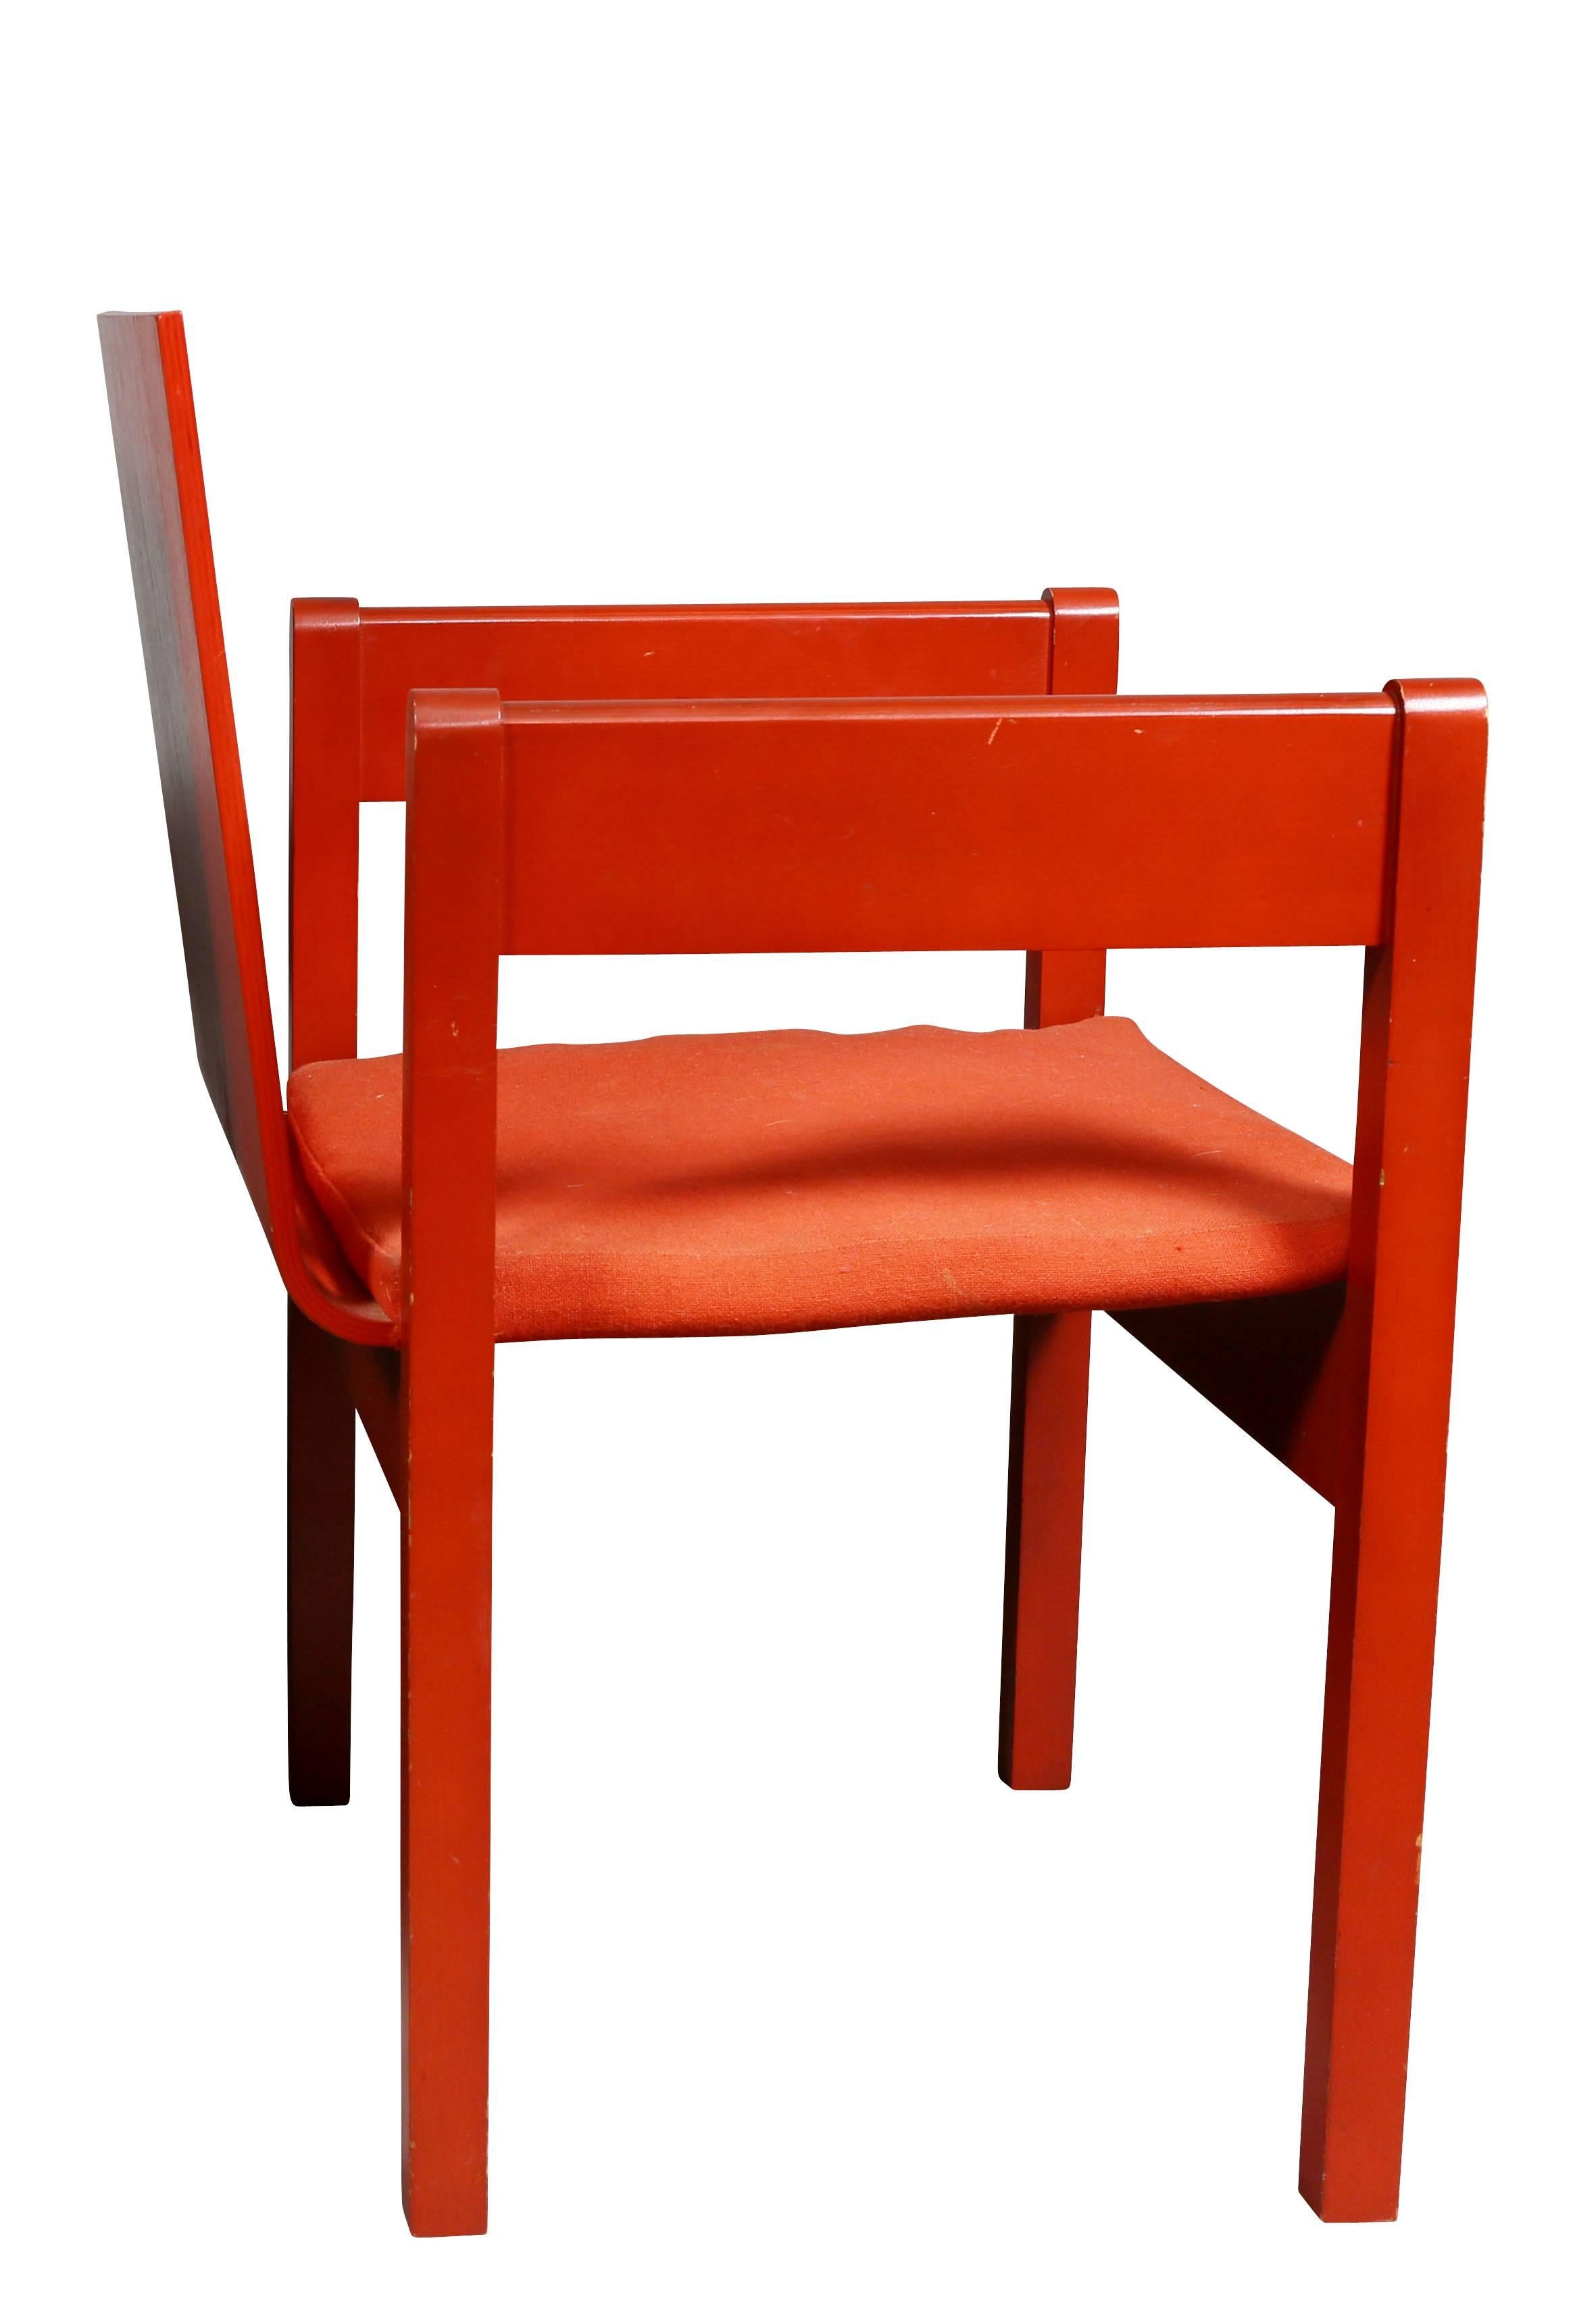 Mid-20th Century Prince of Wales Red Painted Investiture Chair